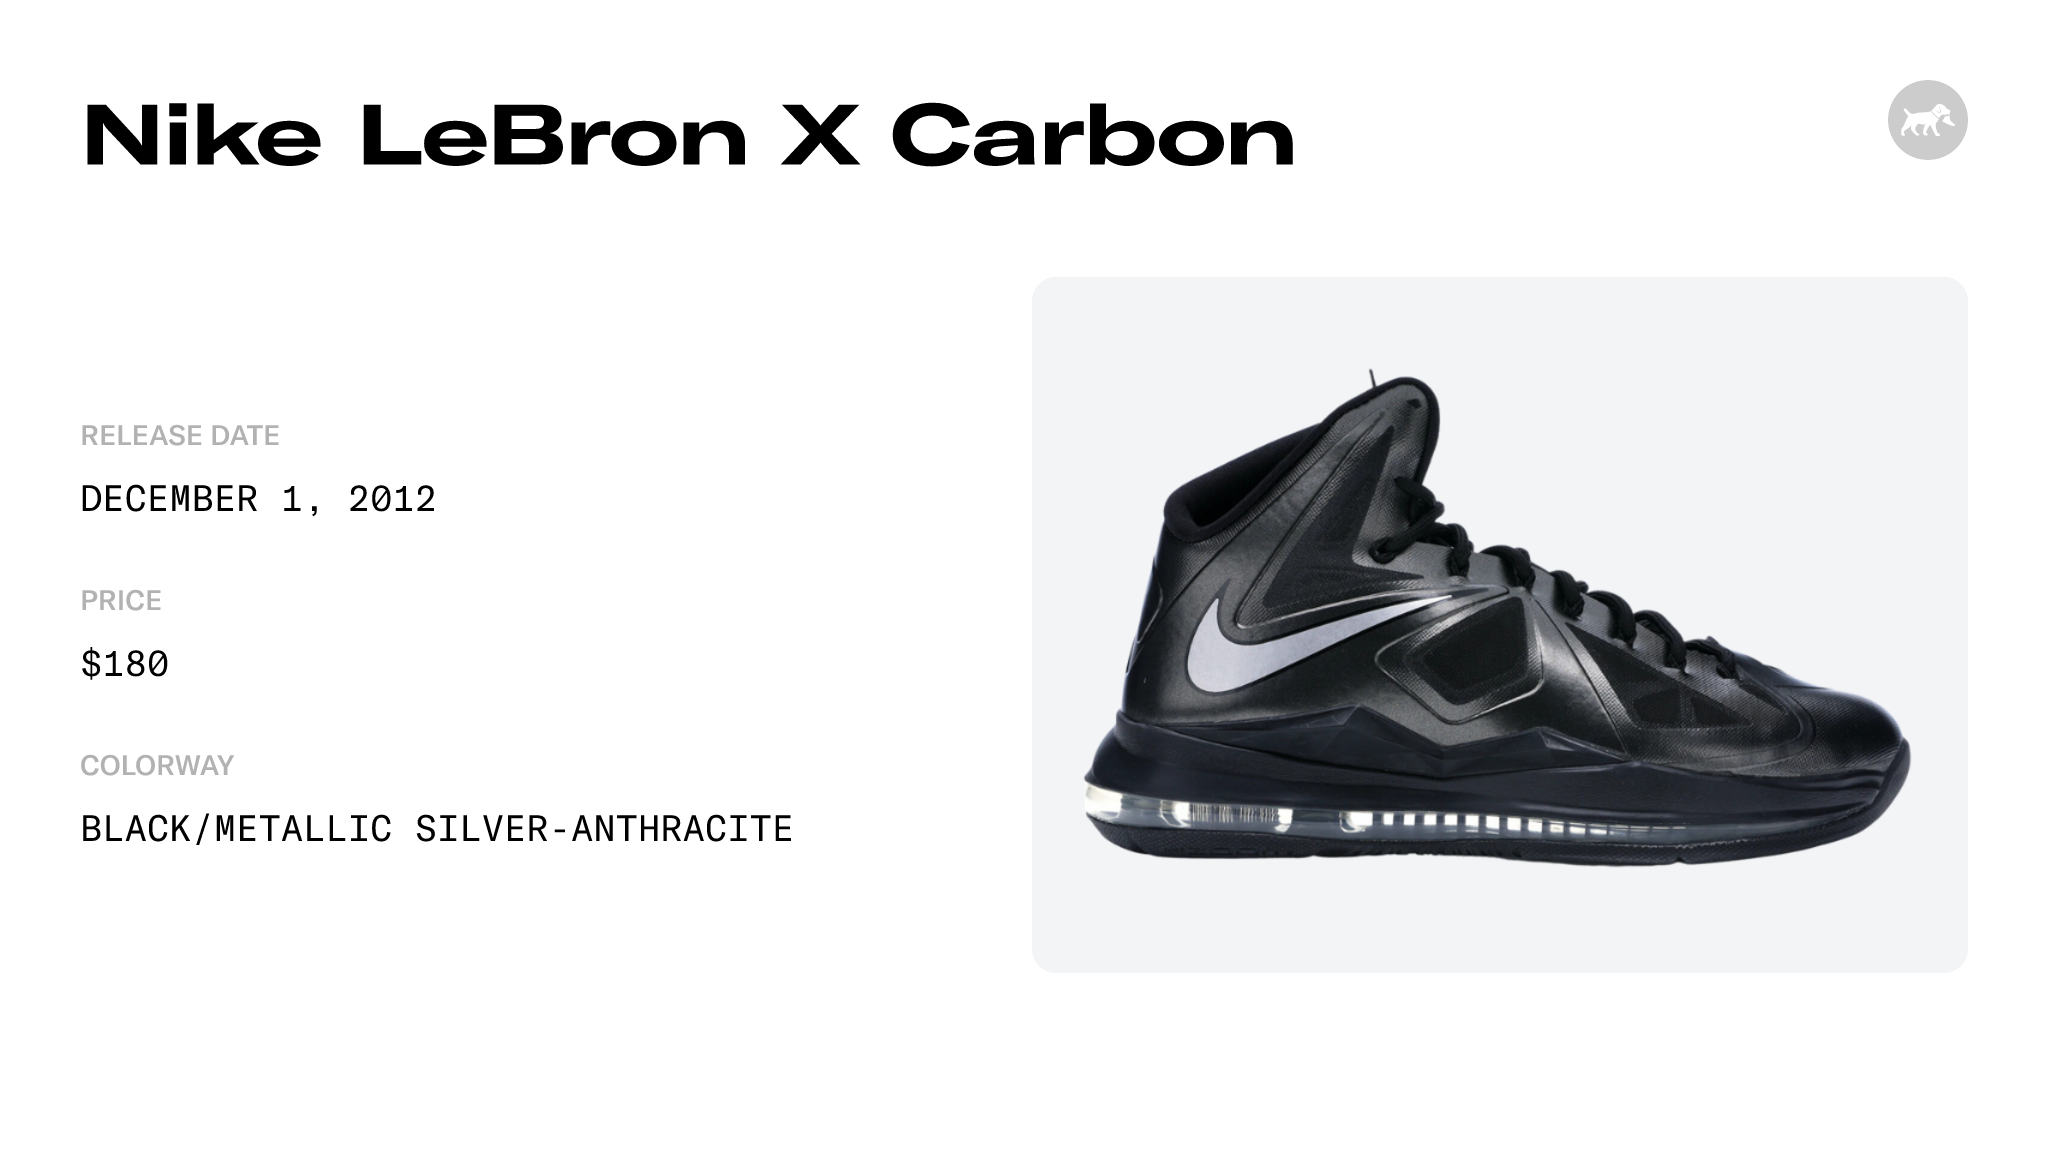 Nike LeBron X Carbon - 541100-001 Raffles and Release Date